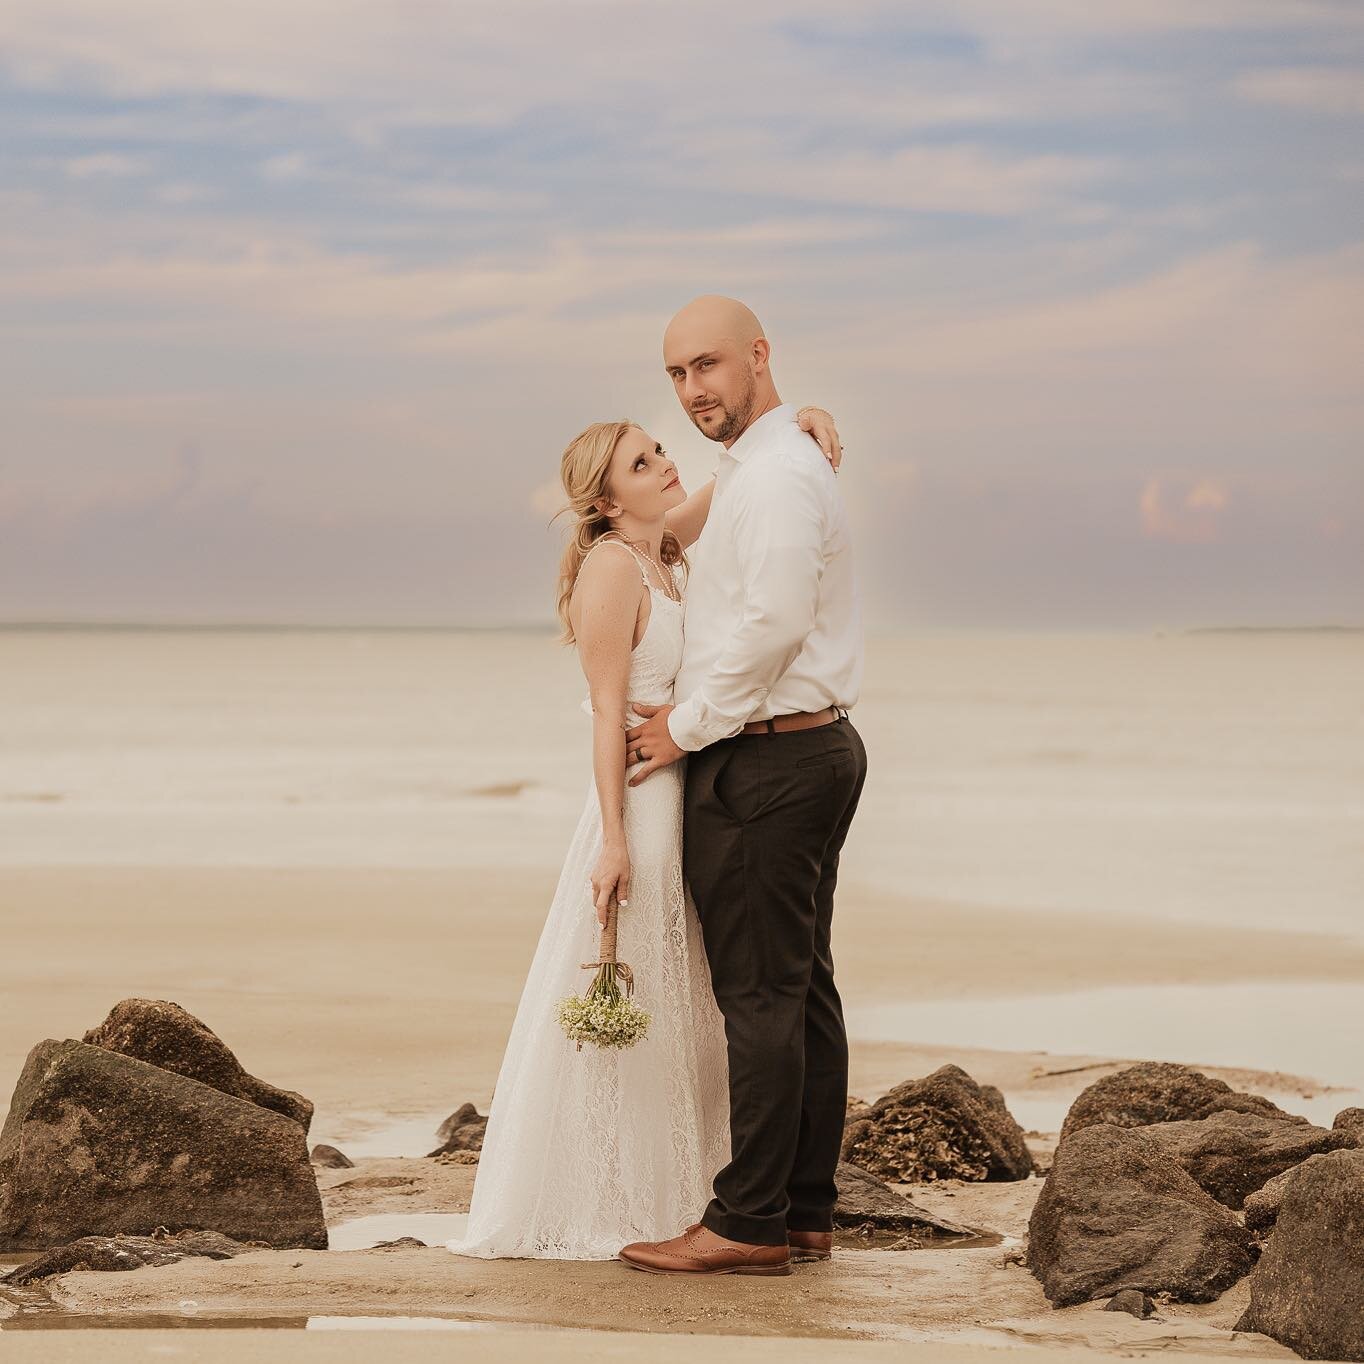 And we'll build this love from the #ground up Now 'til forever it's all of me, all of you, Just take my hand...... 

Tyler + Courtney = A Forever Love 

#savannahelopementphotographer #tybeeisland #destinationphotographer #instaweddings #yourweddingy